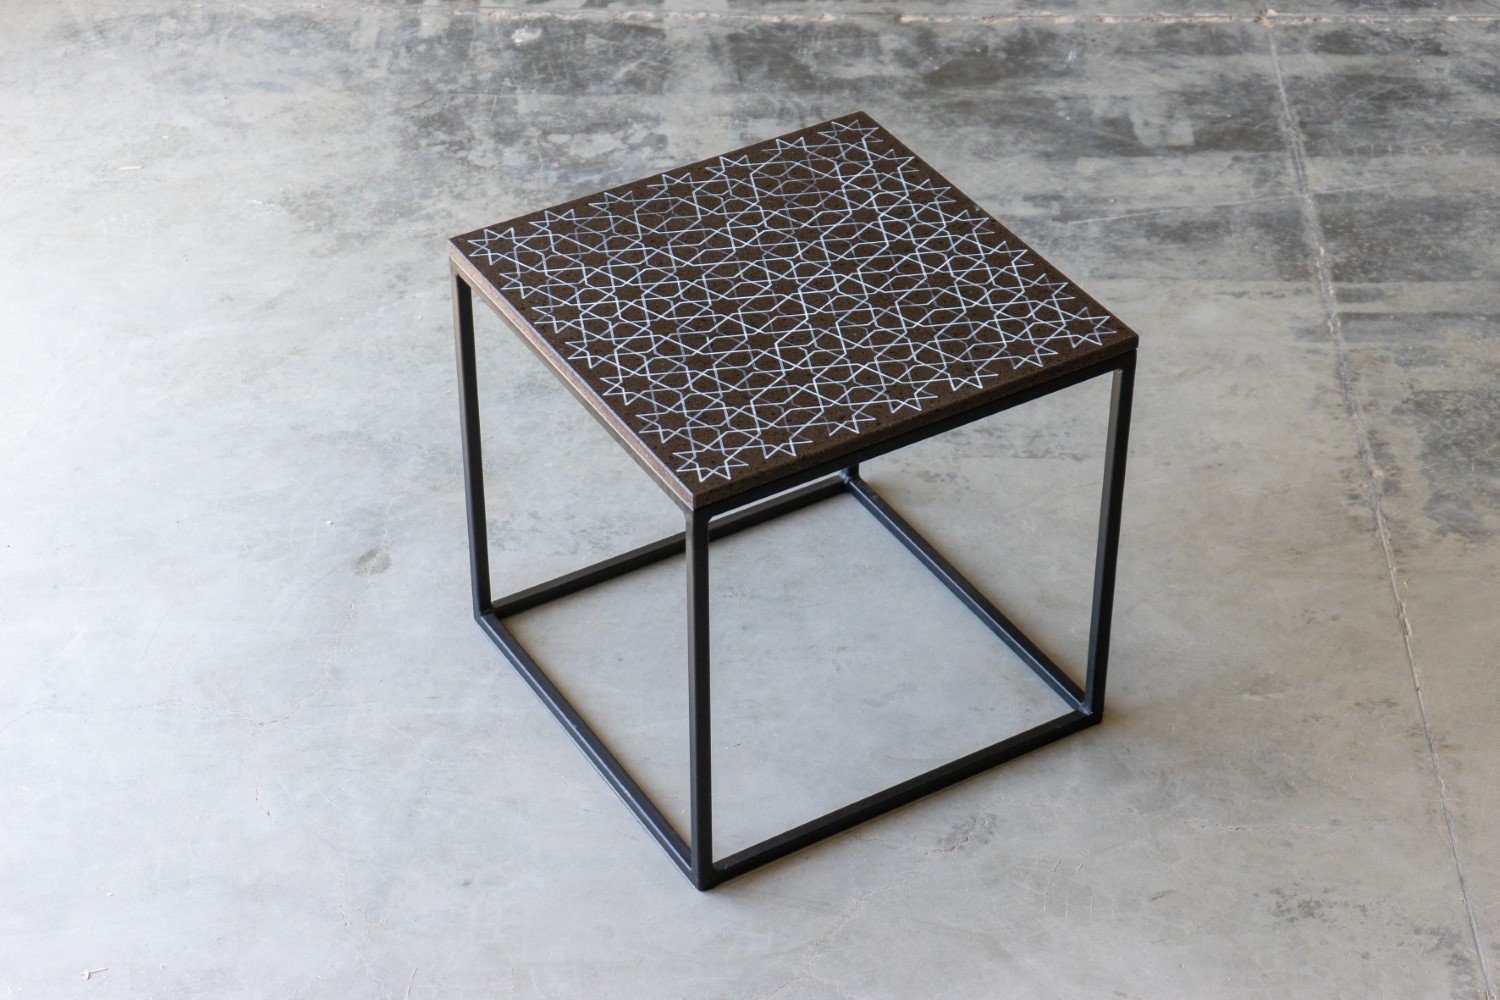 “Geometrico” by Professor Chadi El Tabbah in Collaboration with Made a Mano Presented at Fuorisalone - LTD - News